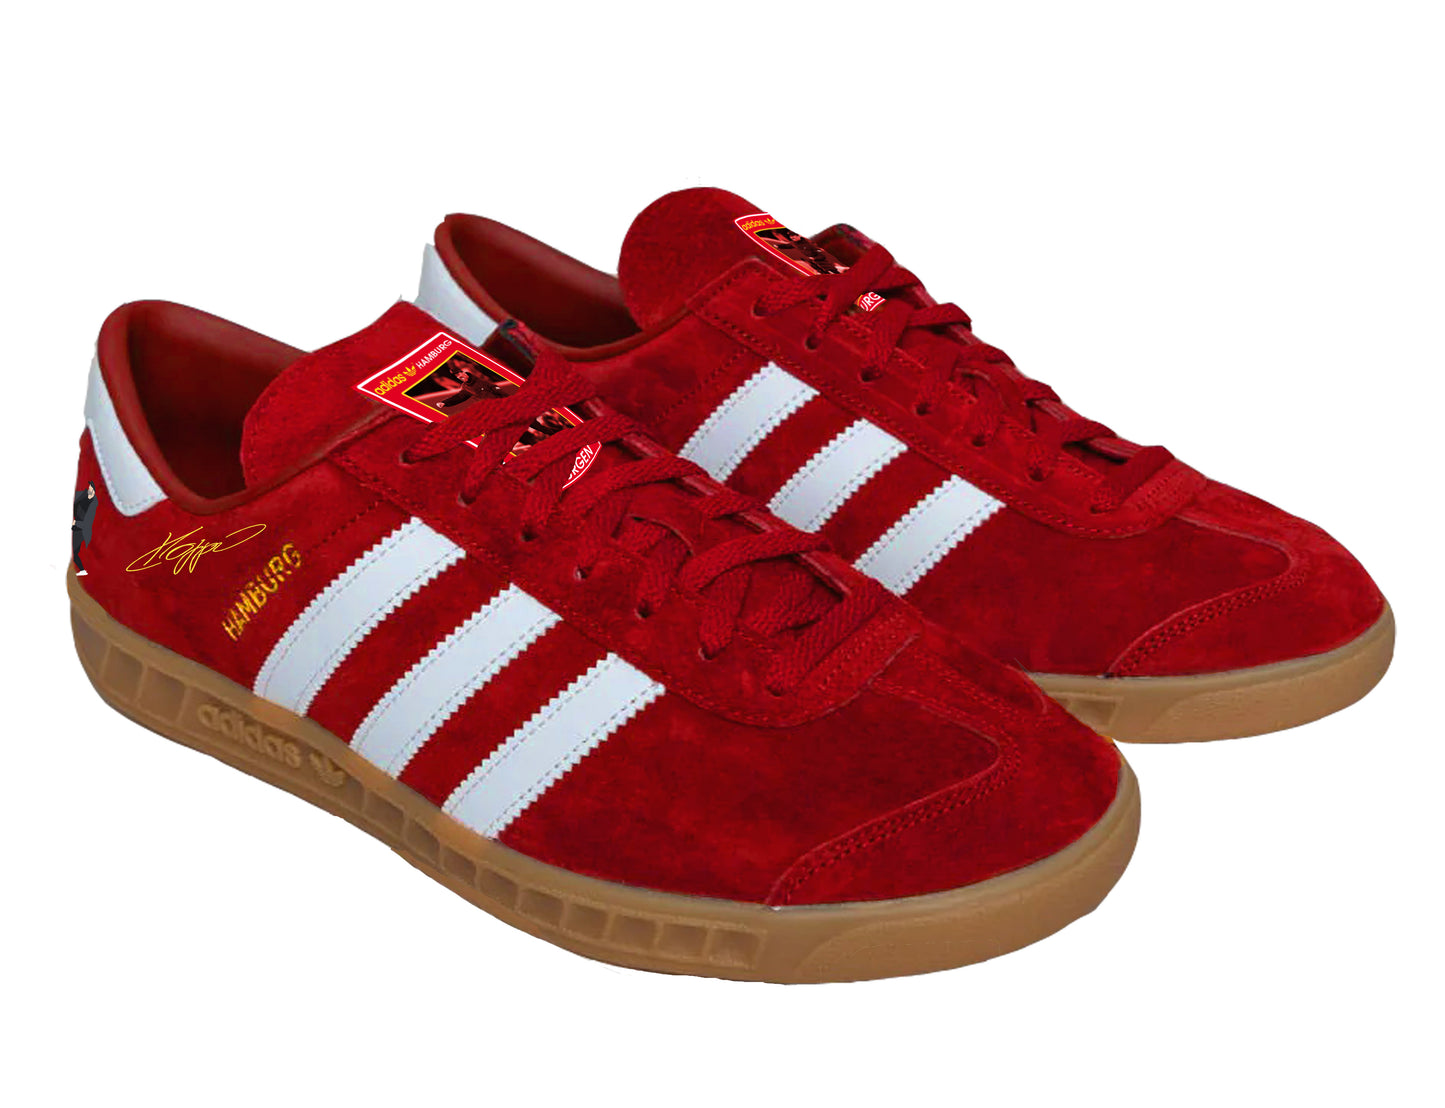 Limited edition Liverpool FC Jurgen Klopp 6 trophies inspired red / white Adidas custom Hamburg trainers / sneakers